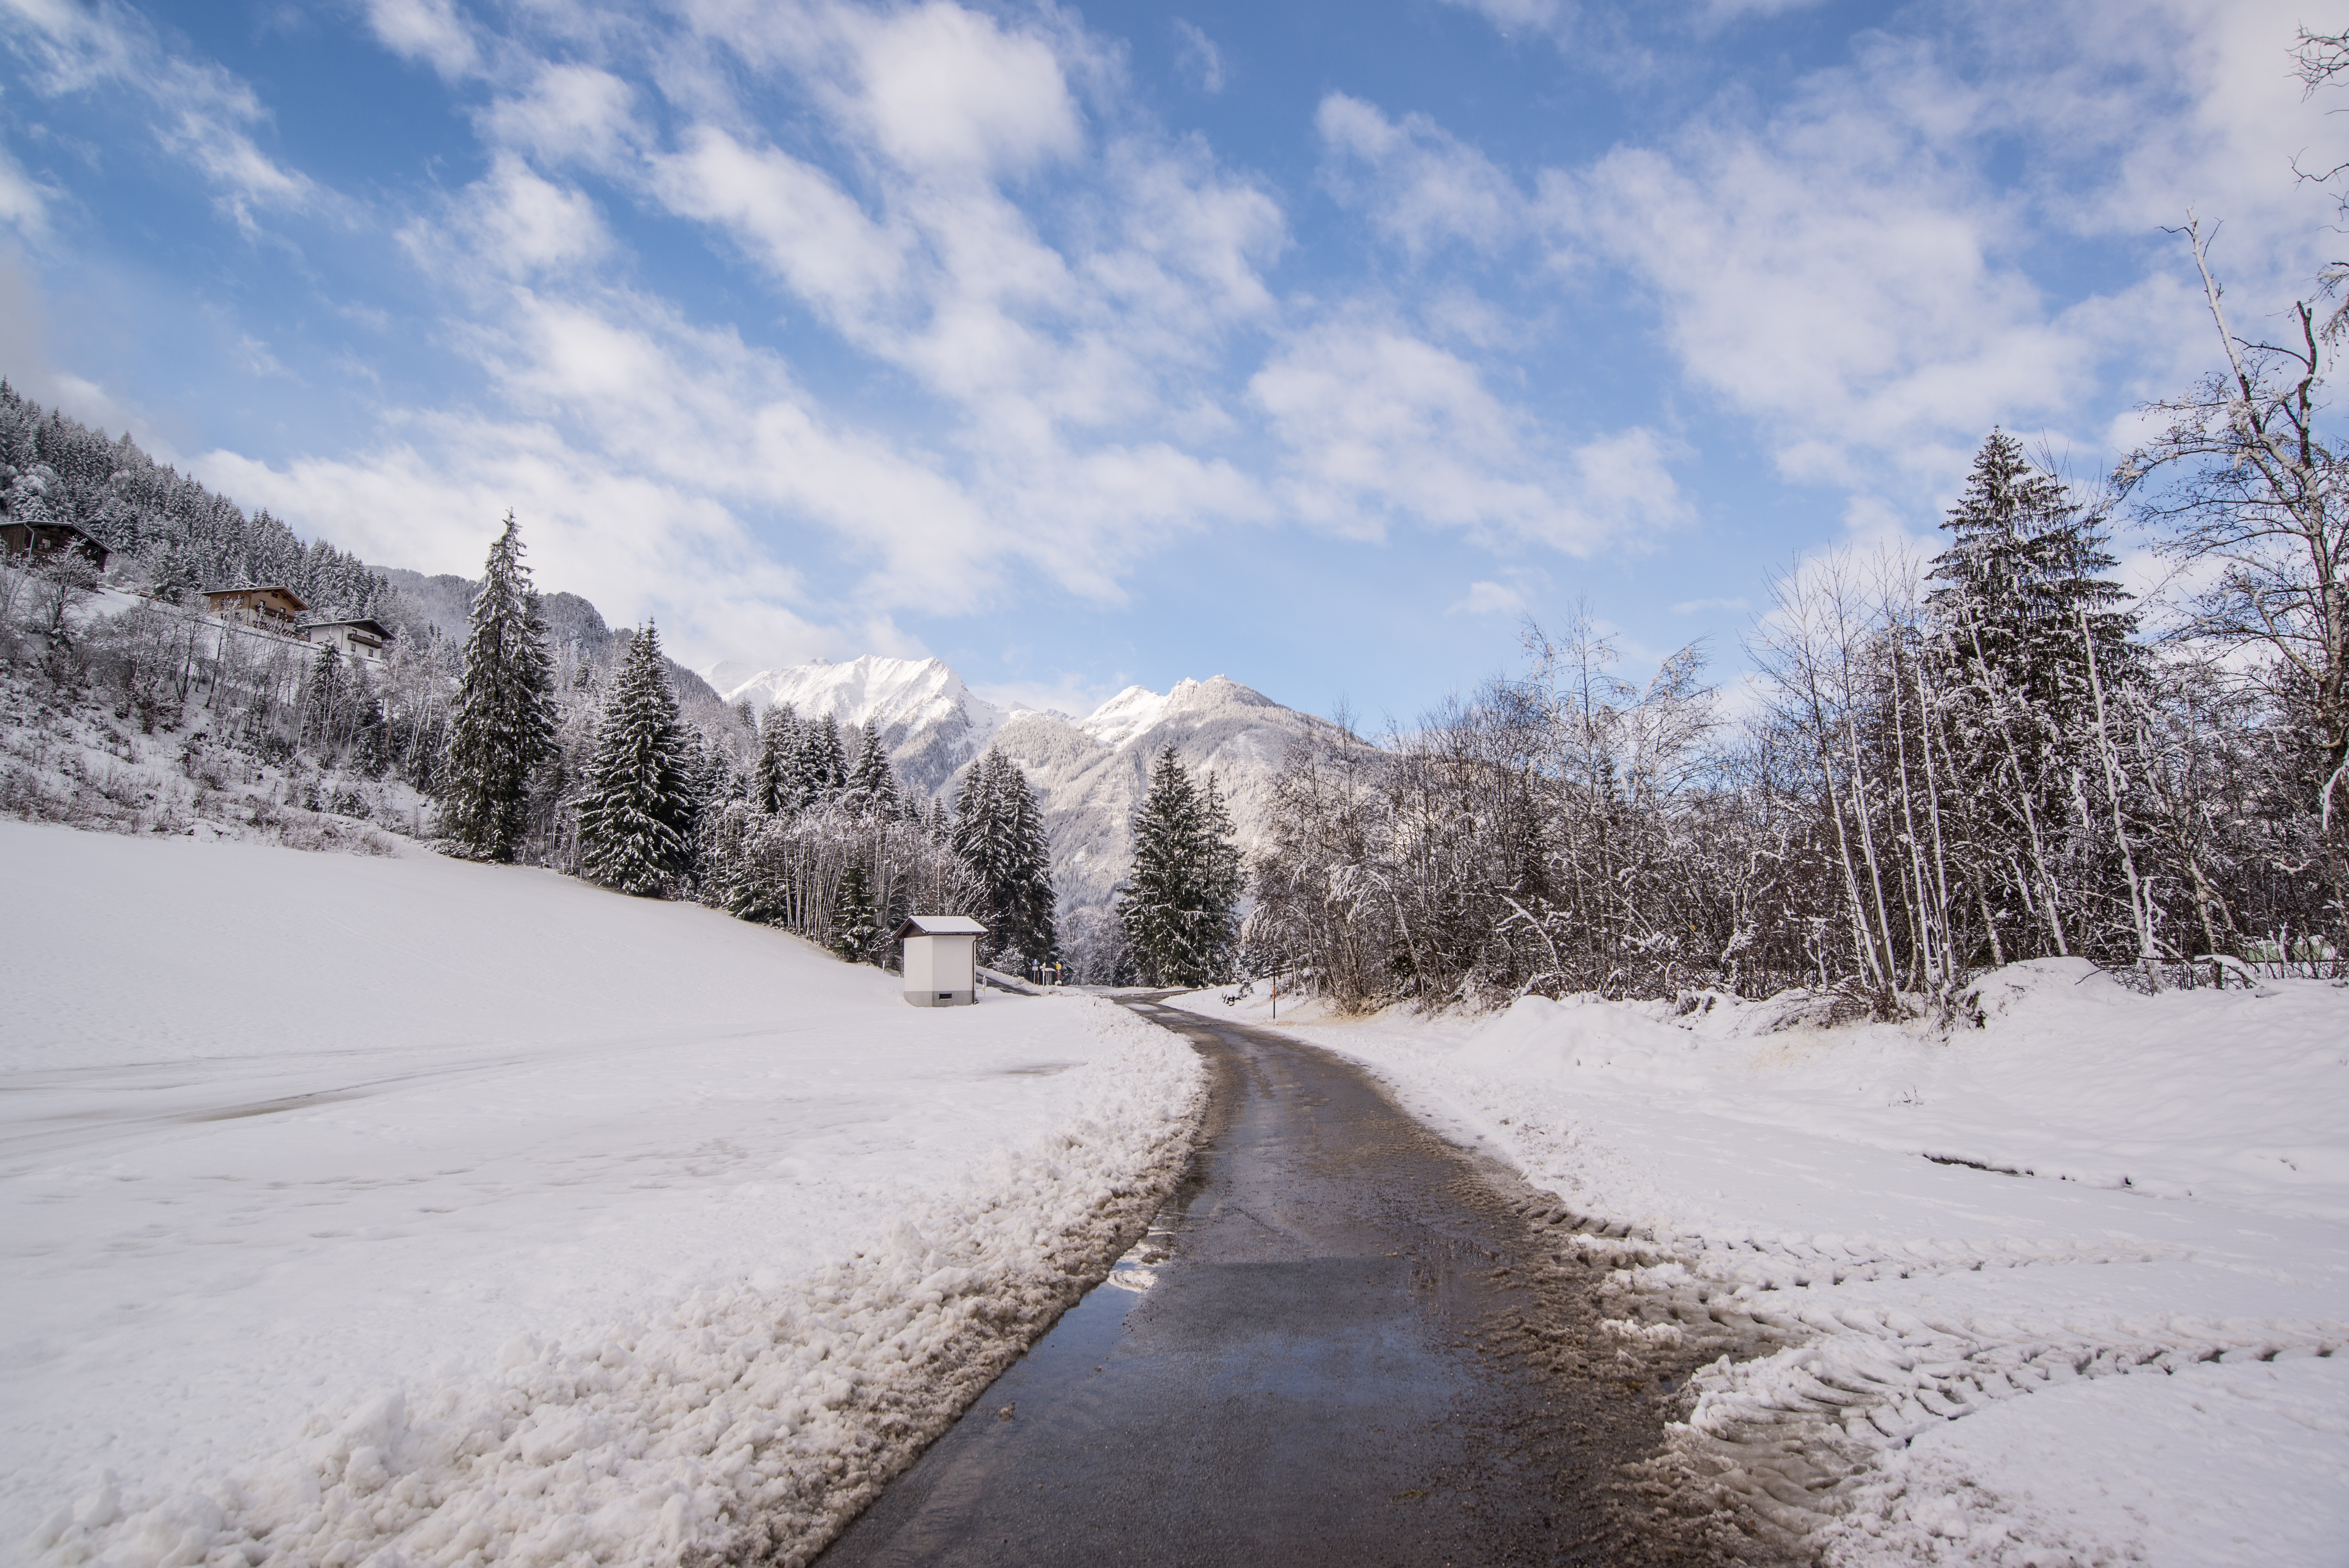 Pavement road surrounded by snow and pine trees photo